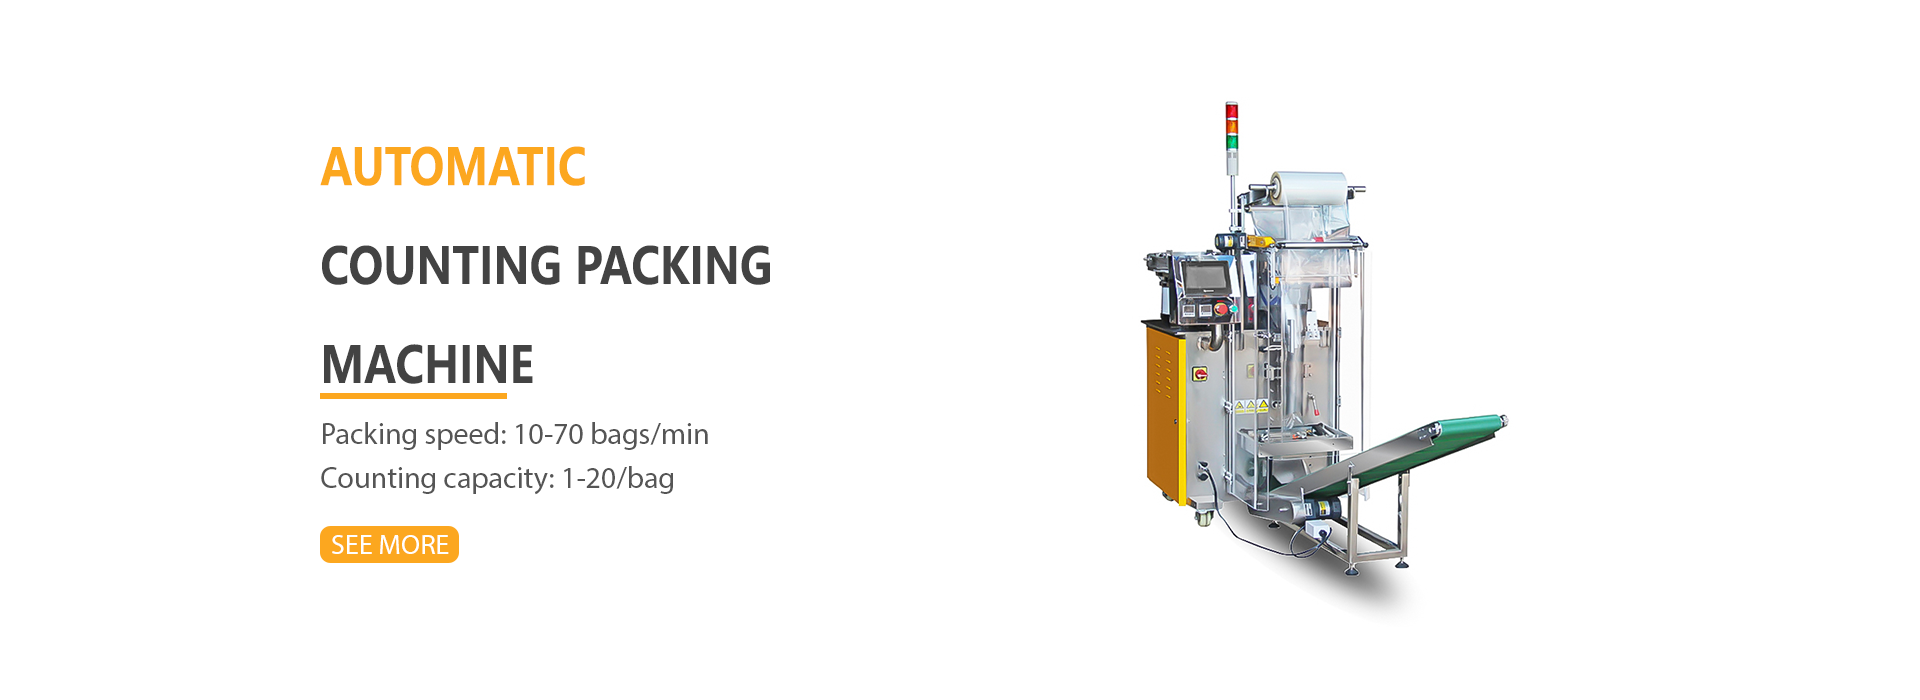 Automatic screw packaging machine brings many advantages to screw manufacturers？